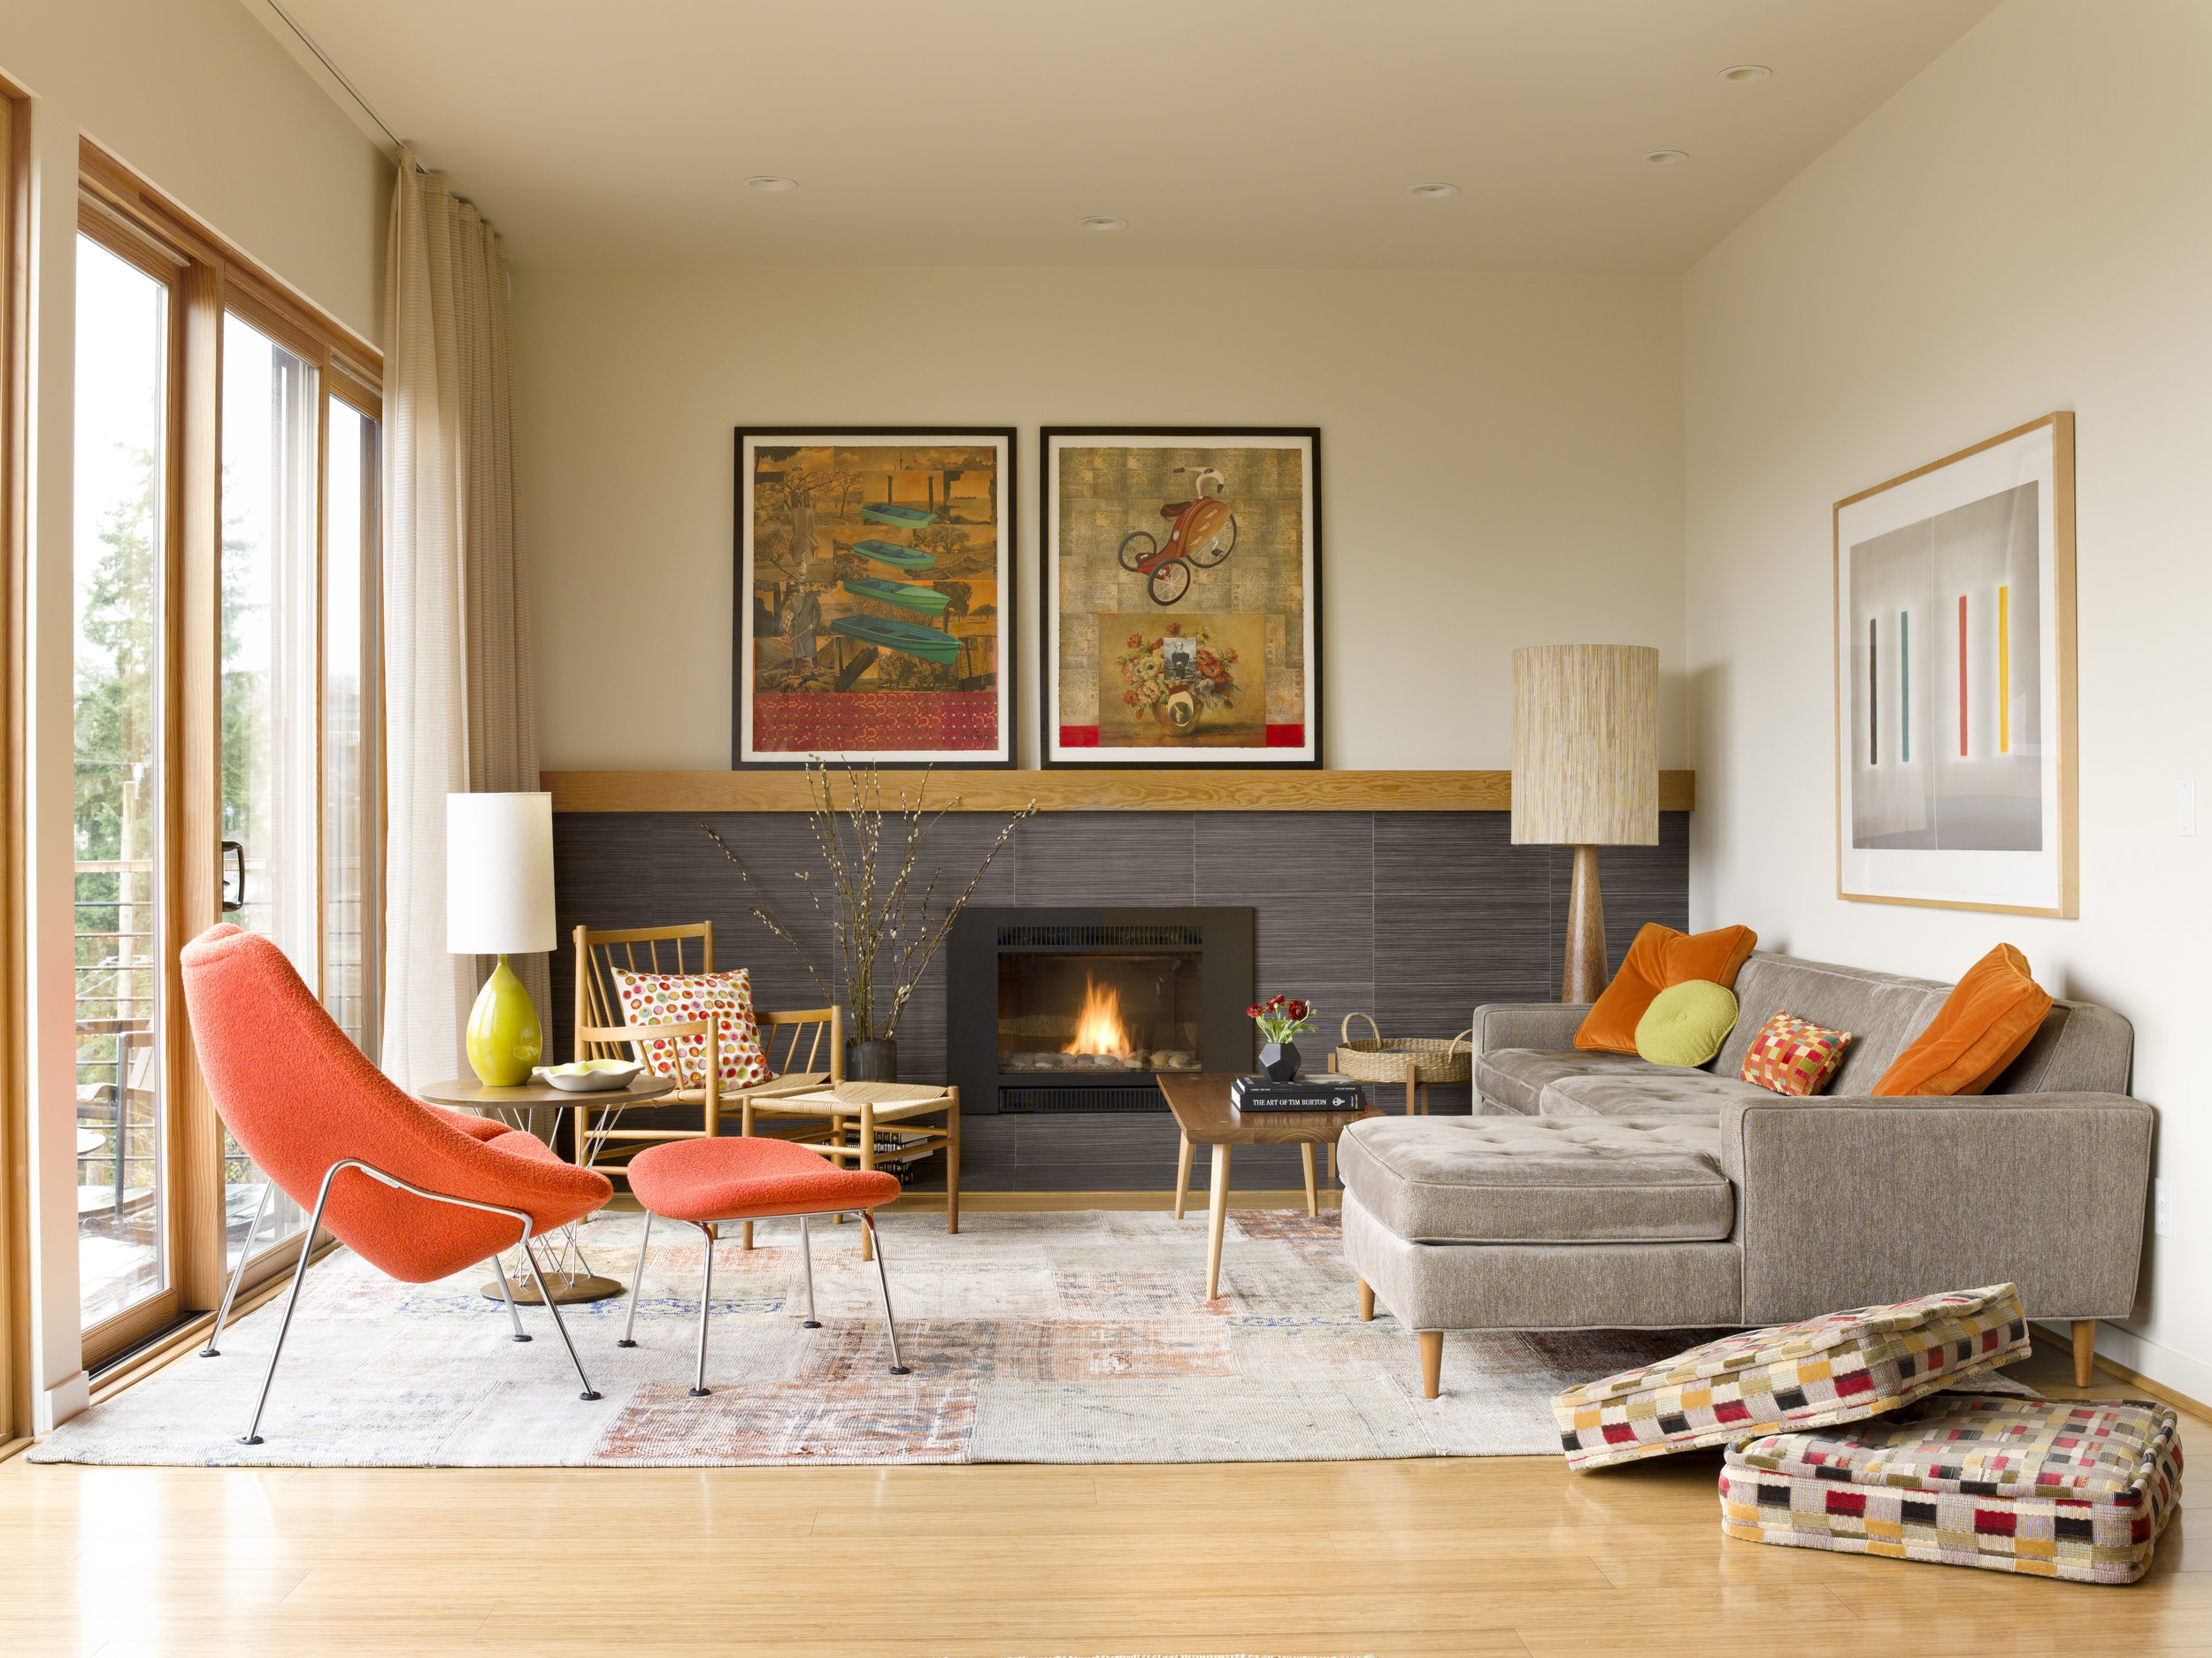  Behind the Scenes of a Midcentury Reno With Love It or List It's Contractor's